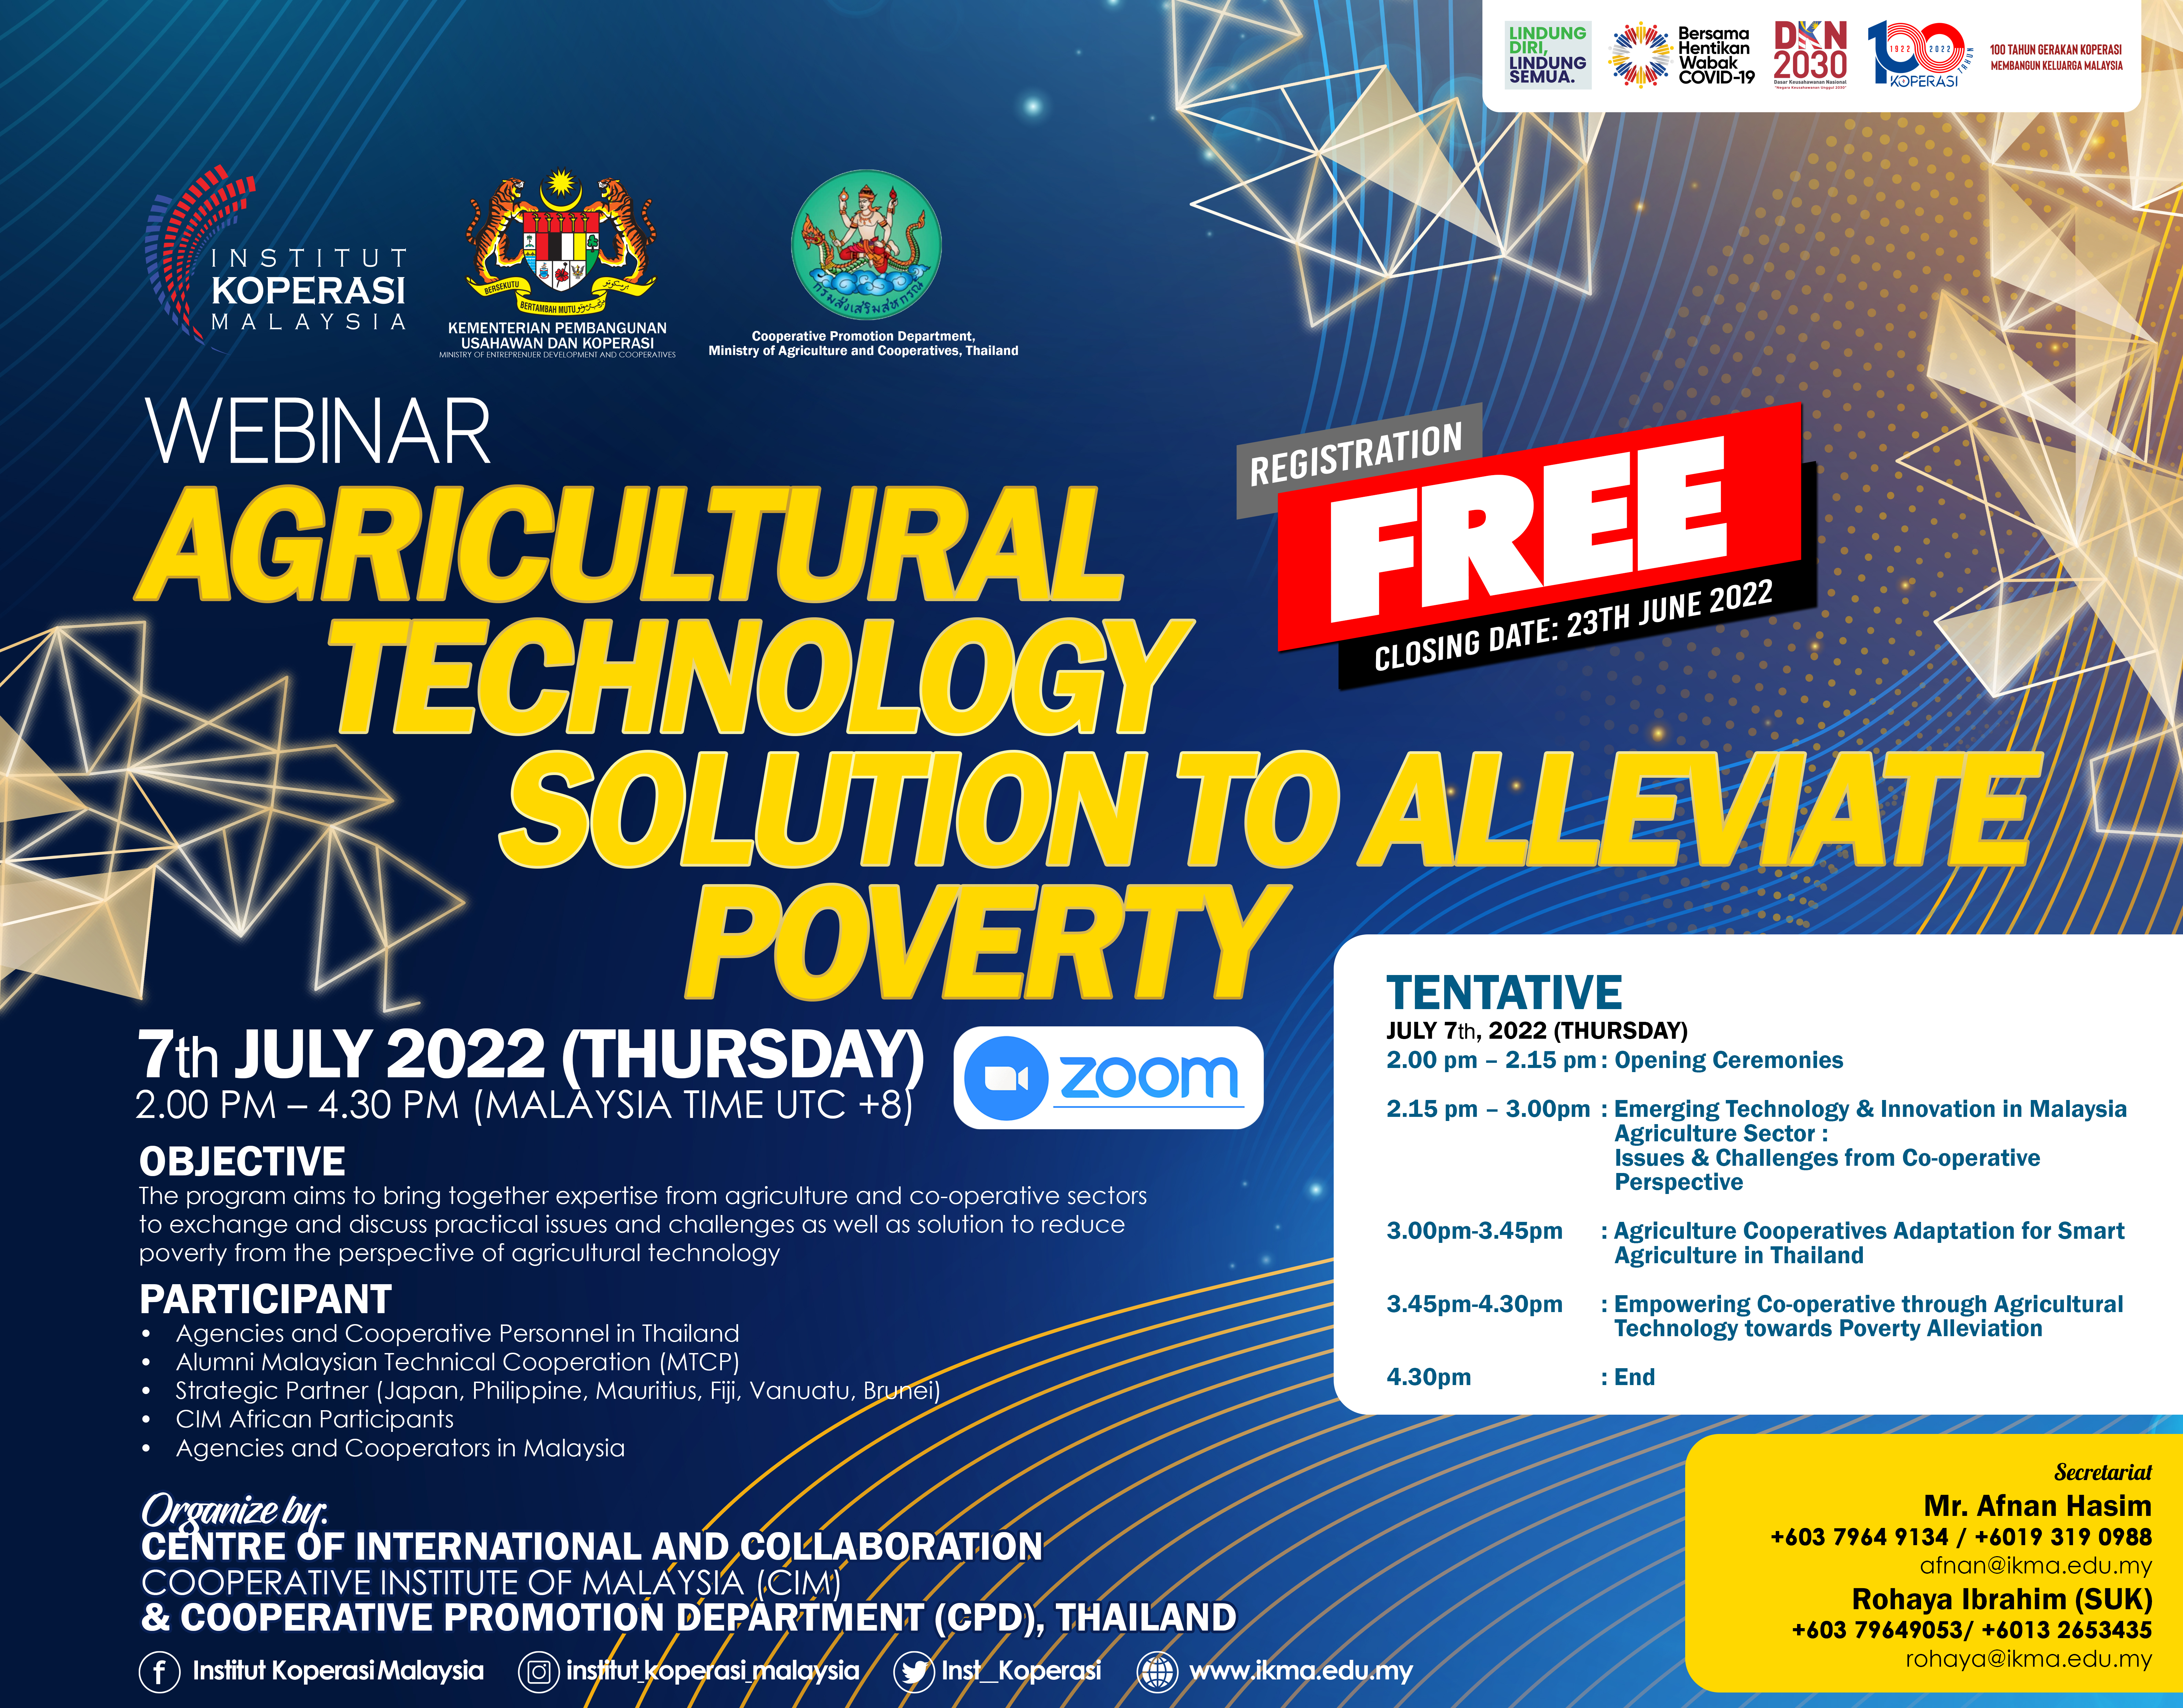 Webinar Agricultural Technology Solution to Alleviate Poverty